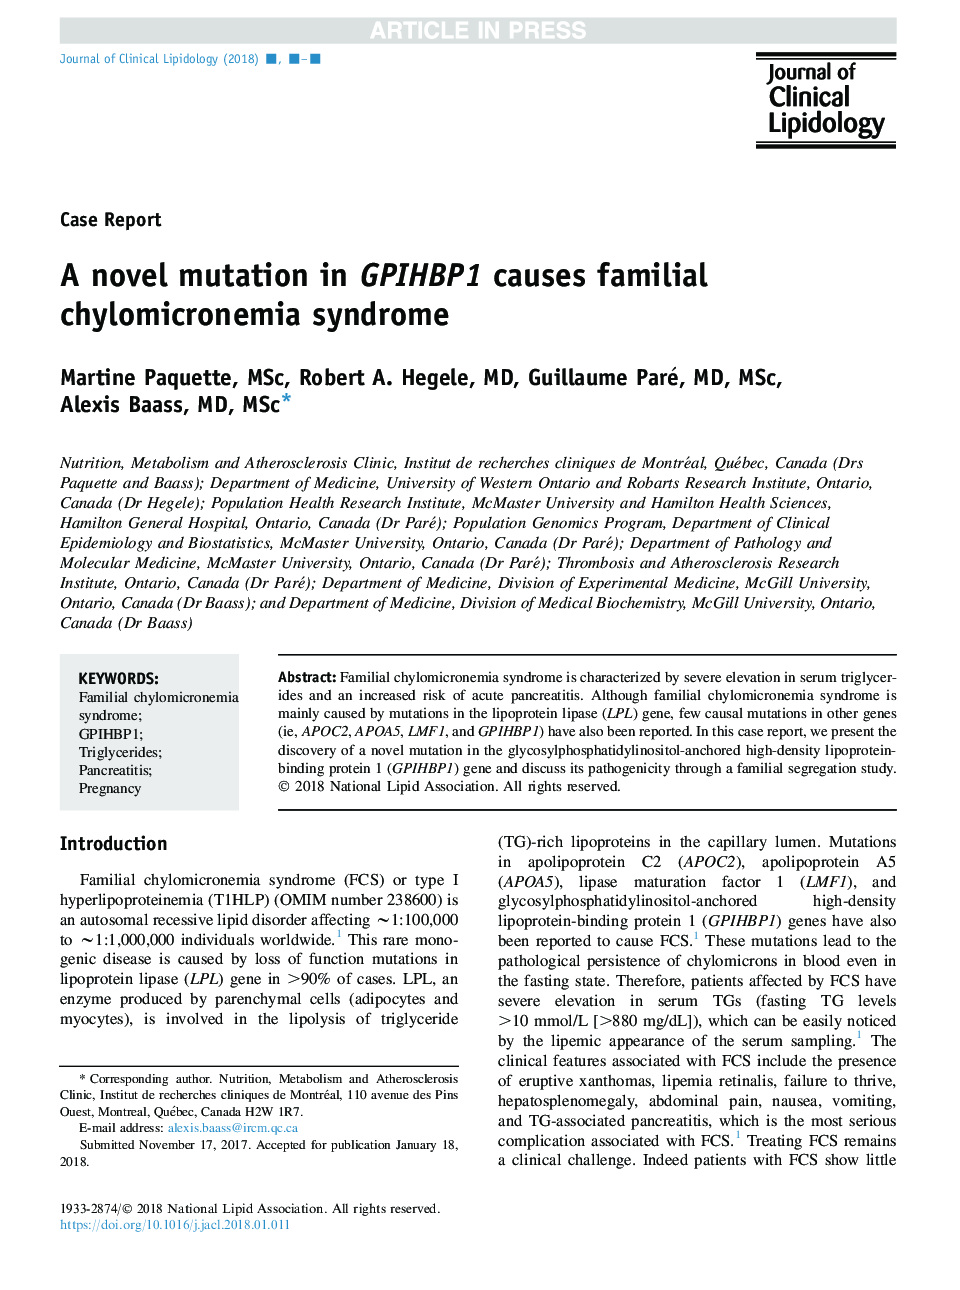 A novel mutation in GPIHBP1 causes familial chylomicronemia syndrome